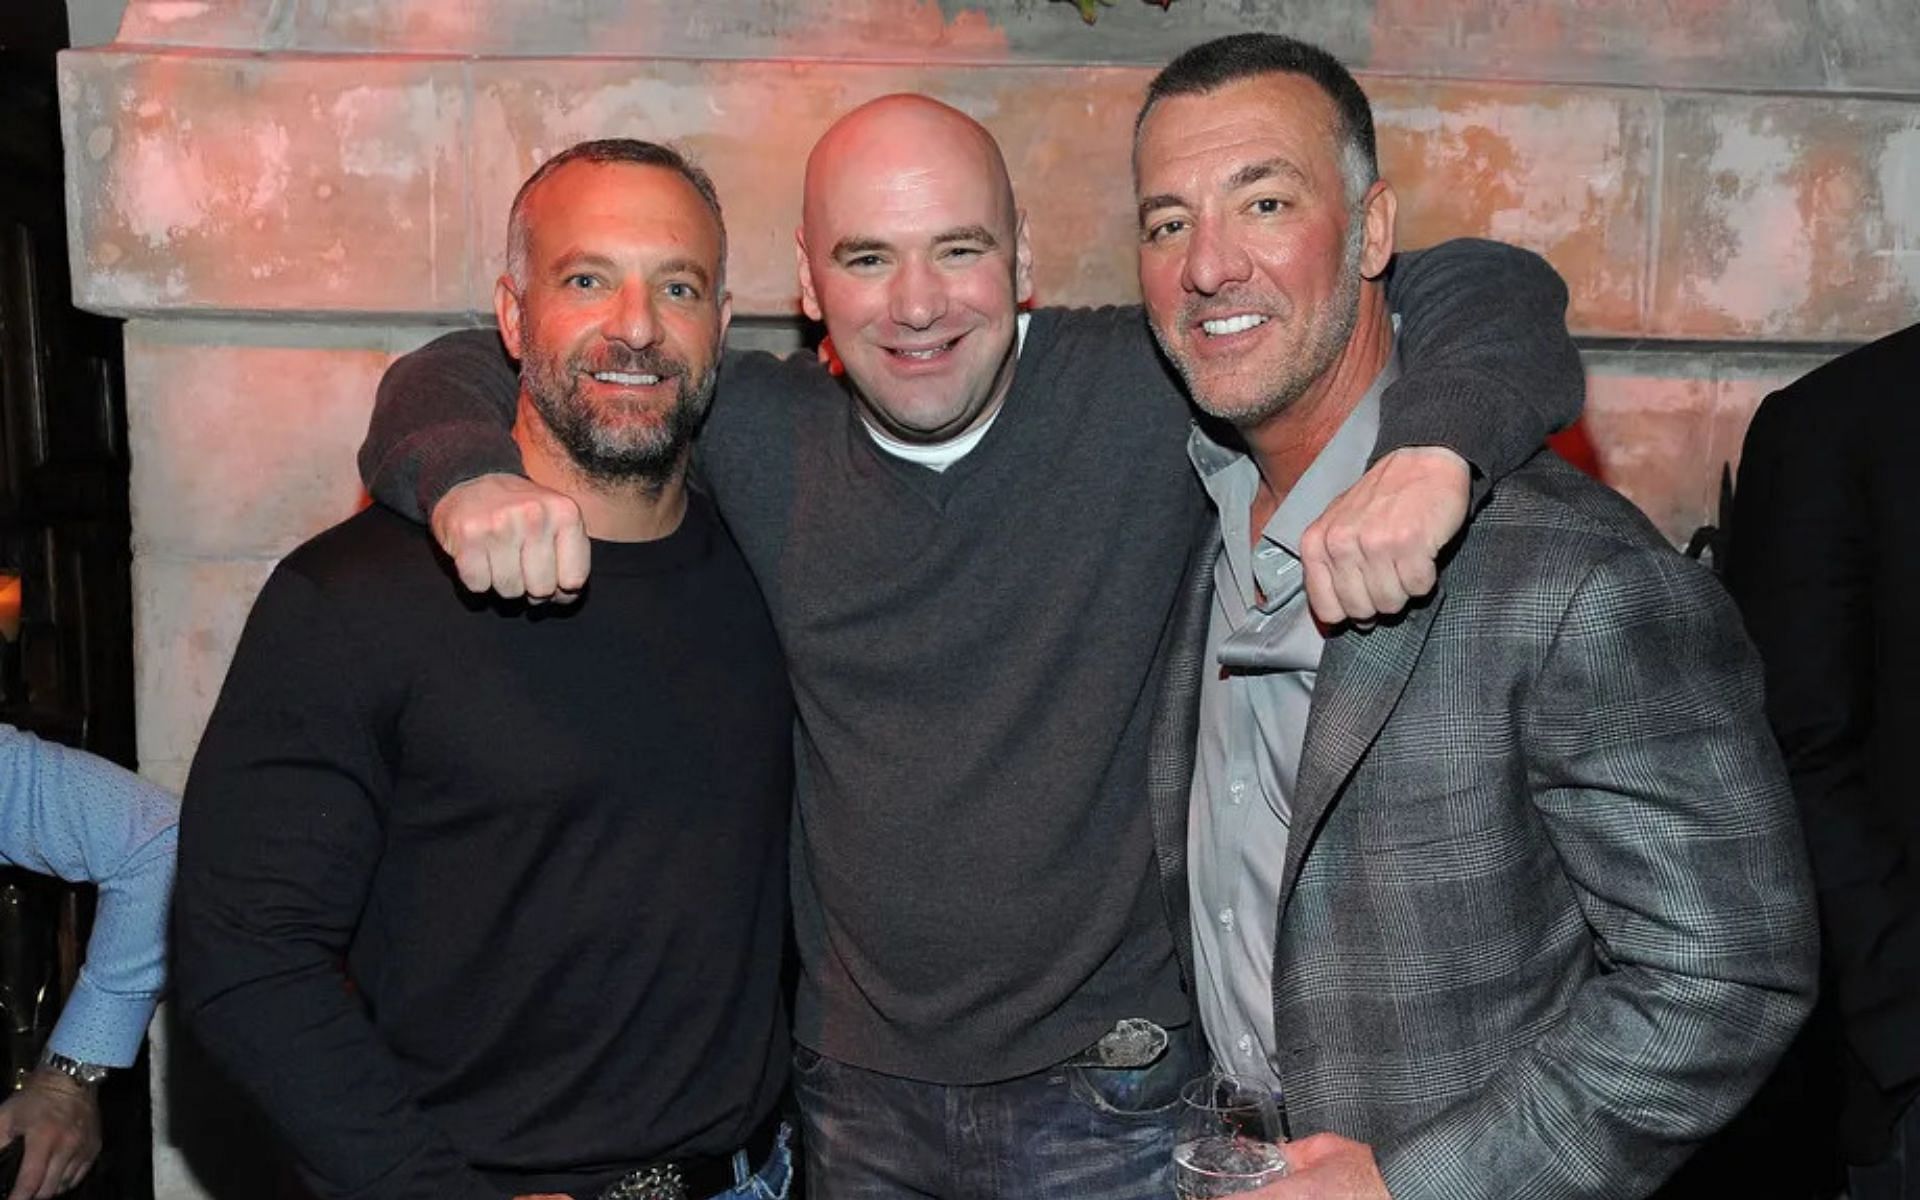 Dana White with Fertitta brothers [Image source: Bloody Elbow]